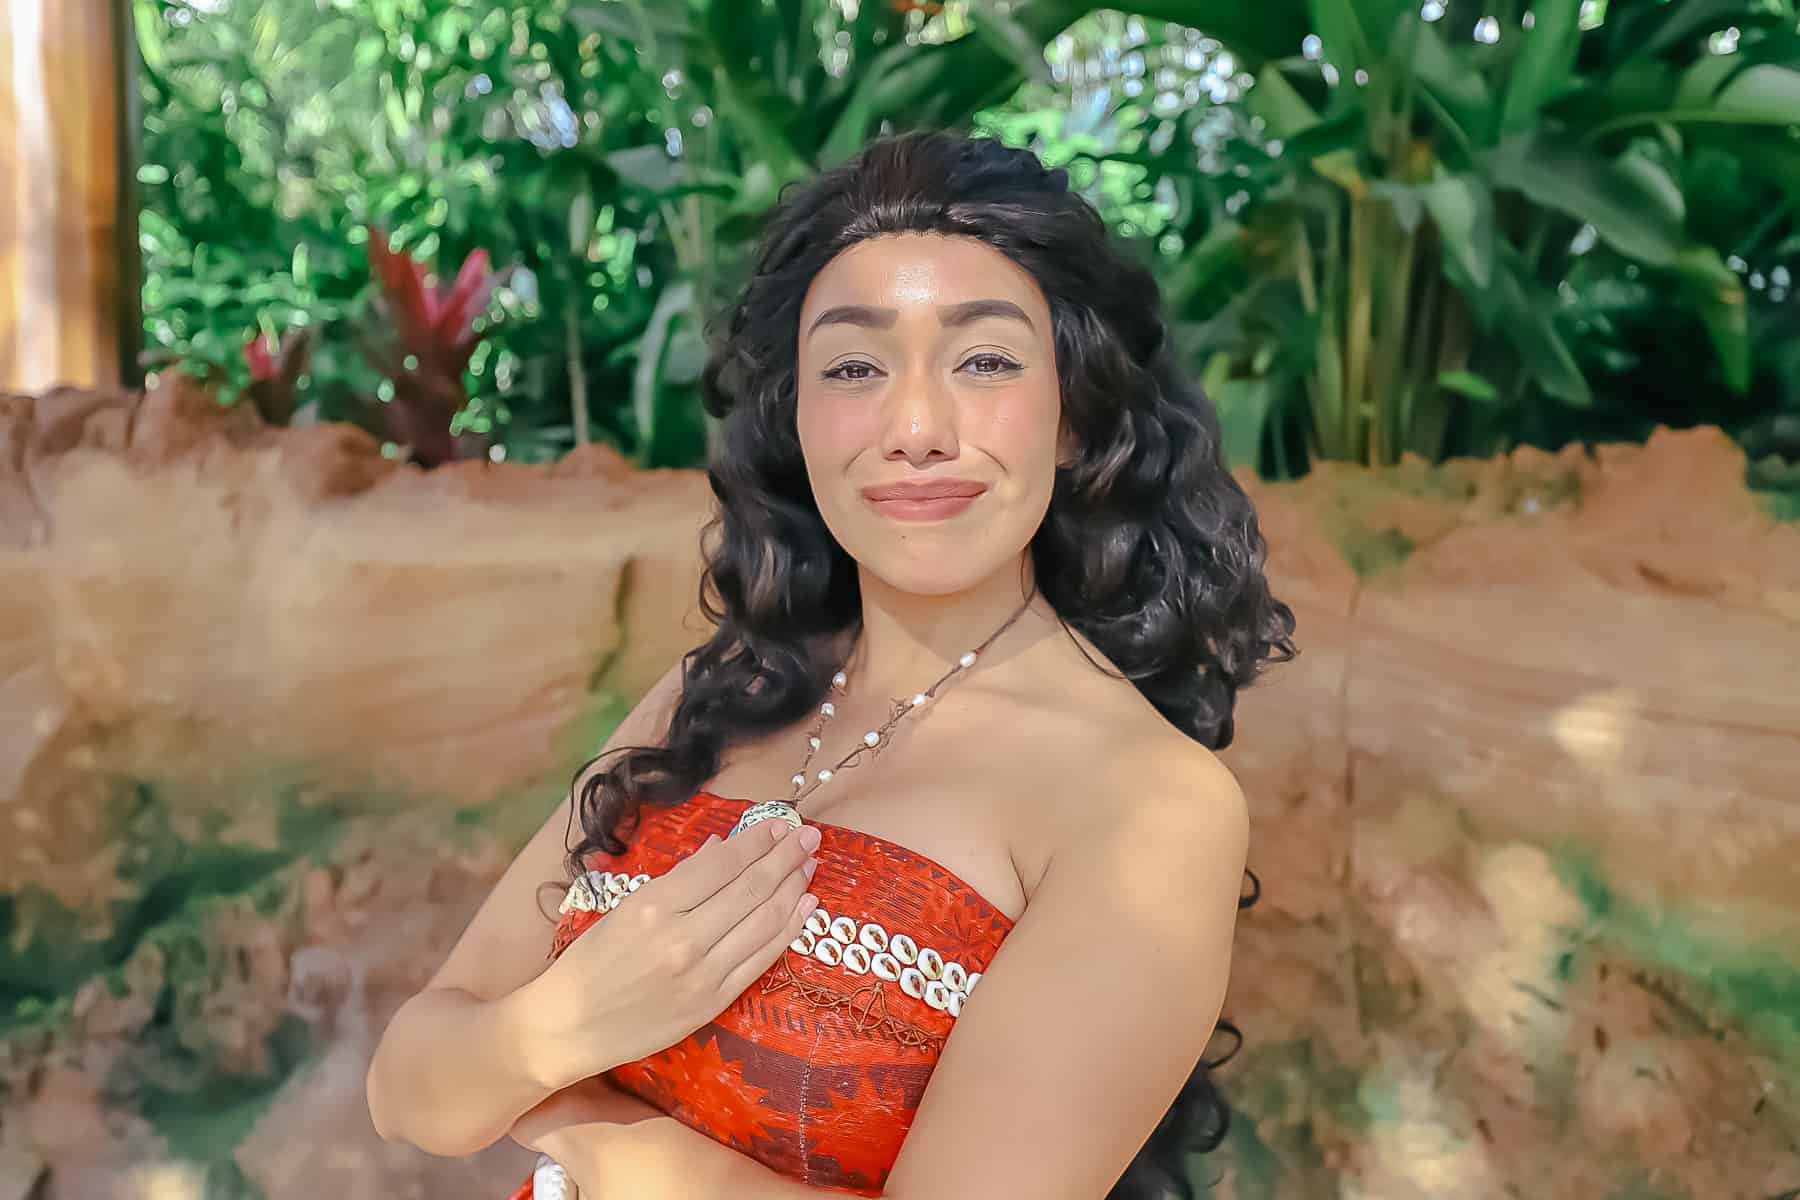 Where to Meet Moana at Epcot (Her Character Meet-and-Greet Near Journey of Water)